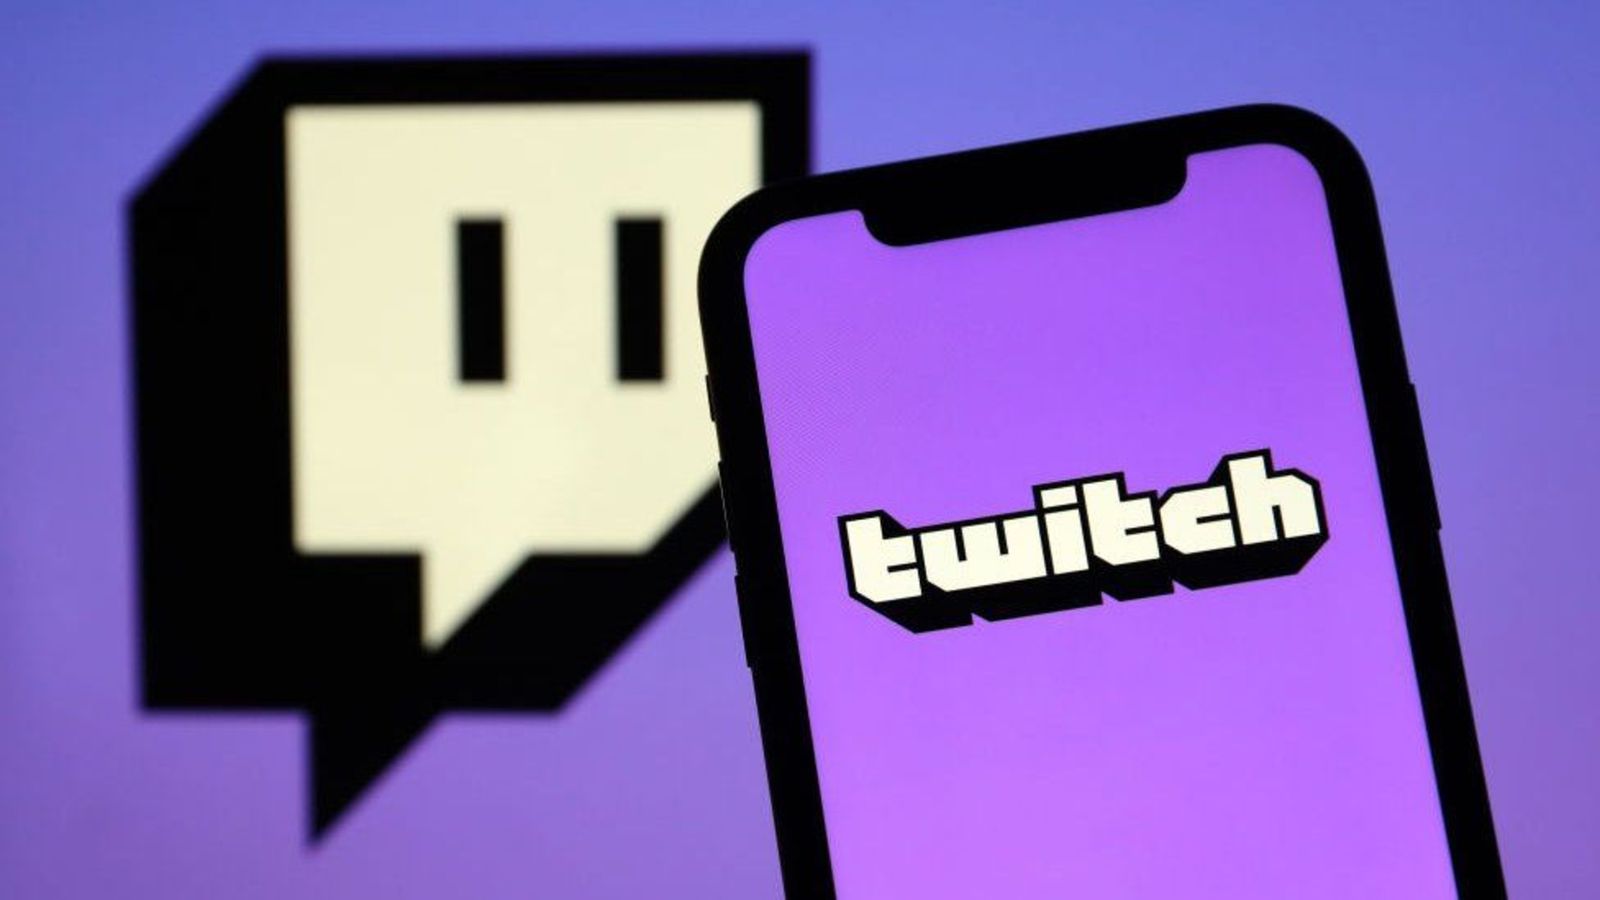 Affiliated - Twitch logo on a phone, in the background is the Twitch icon.